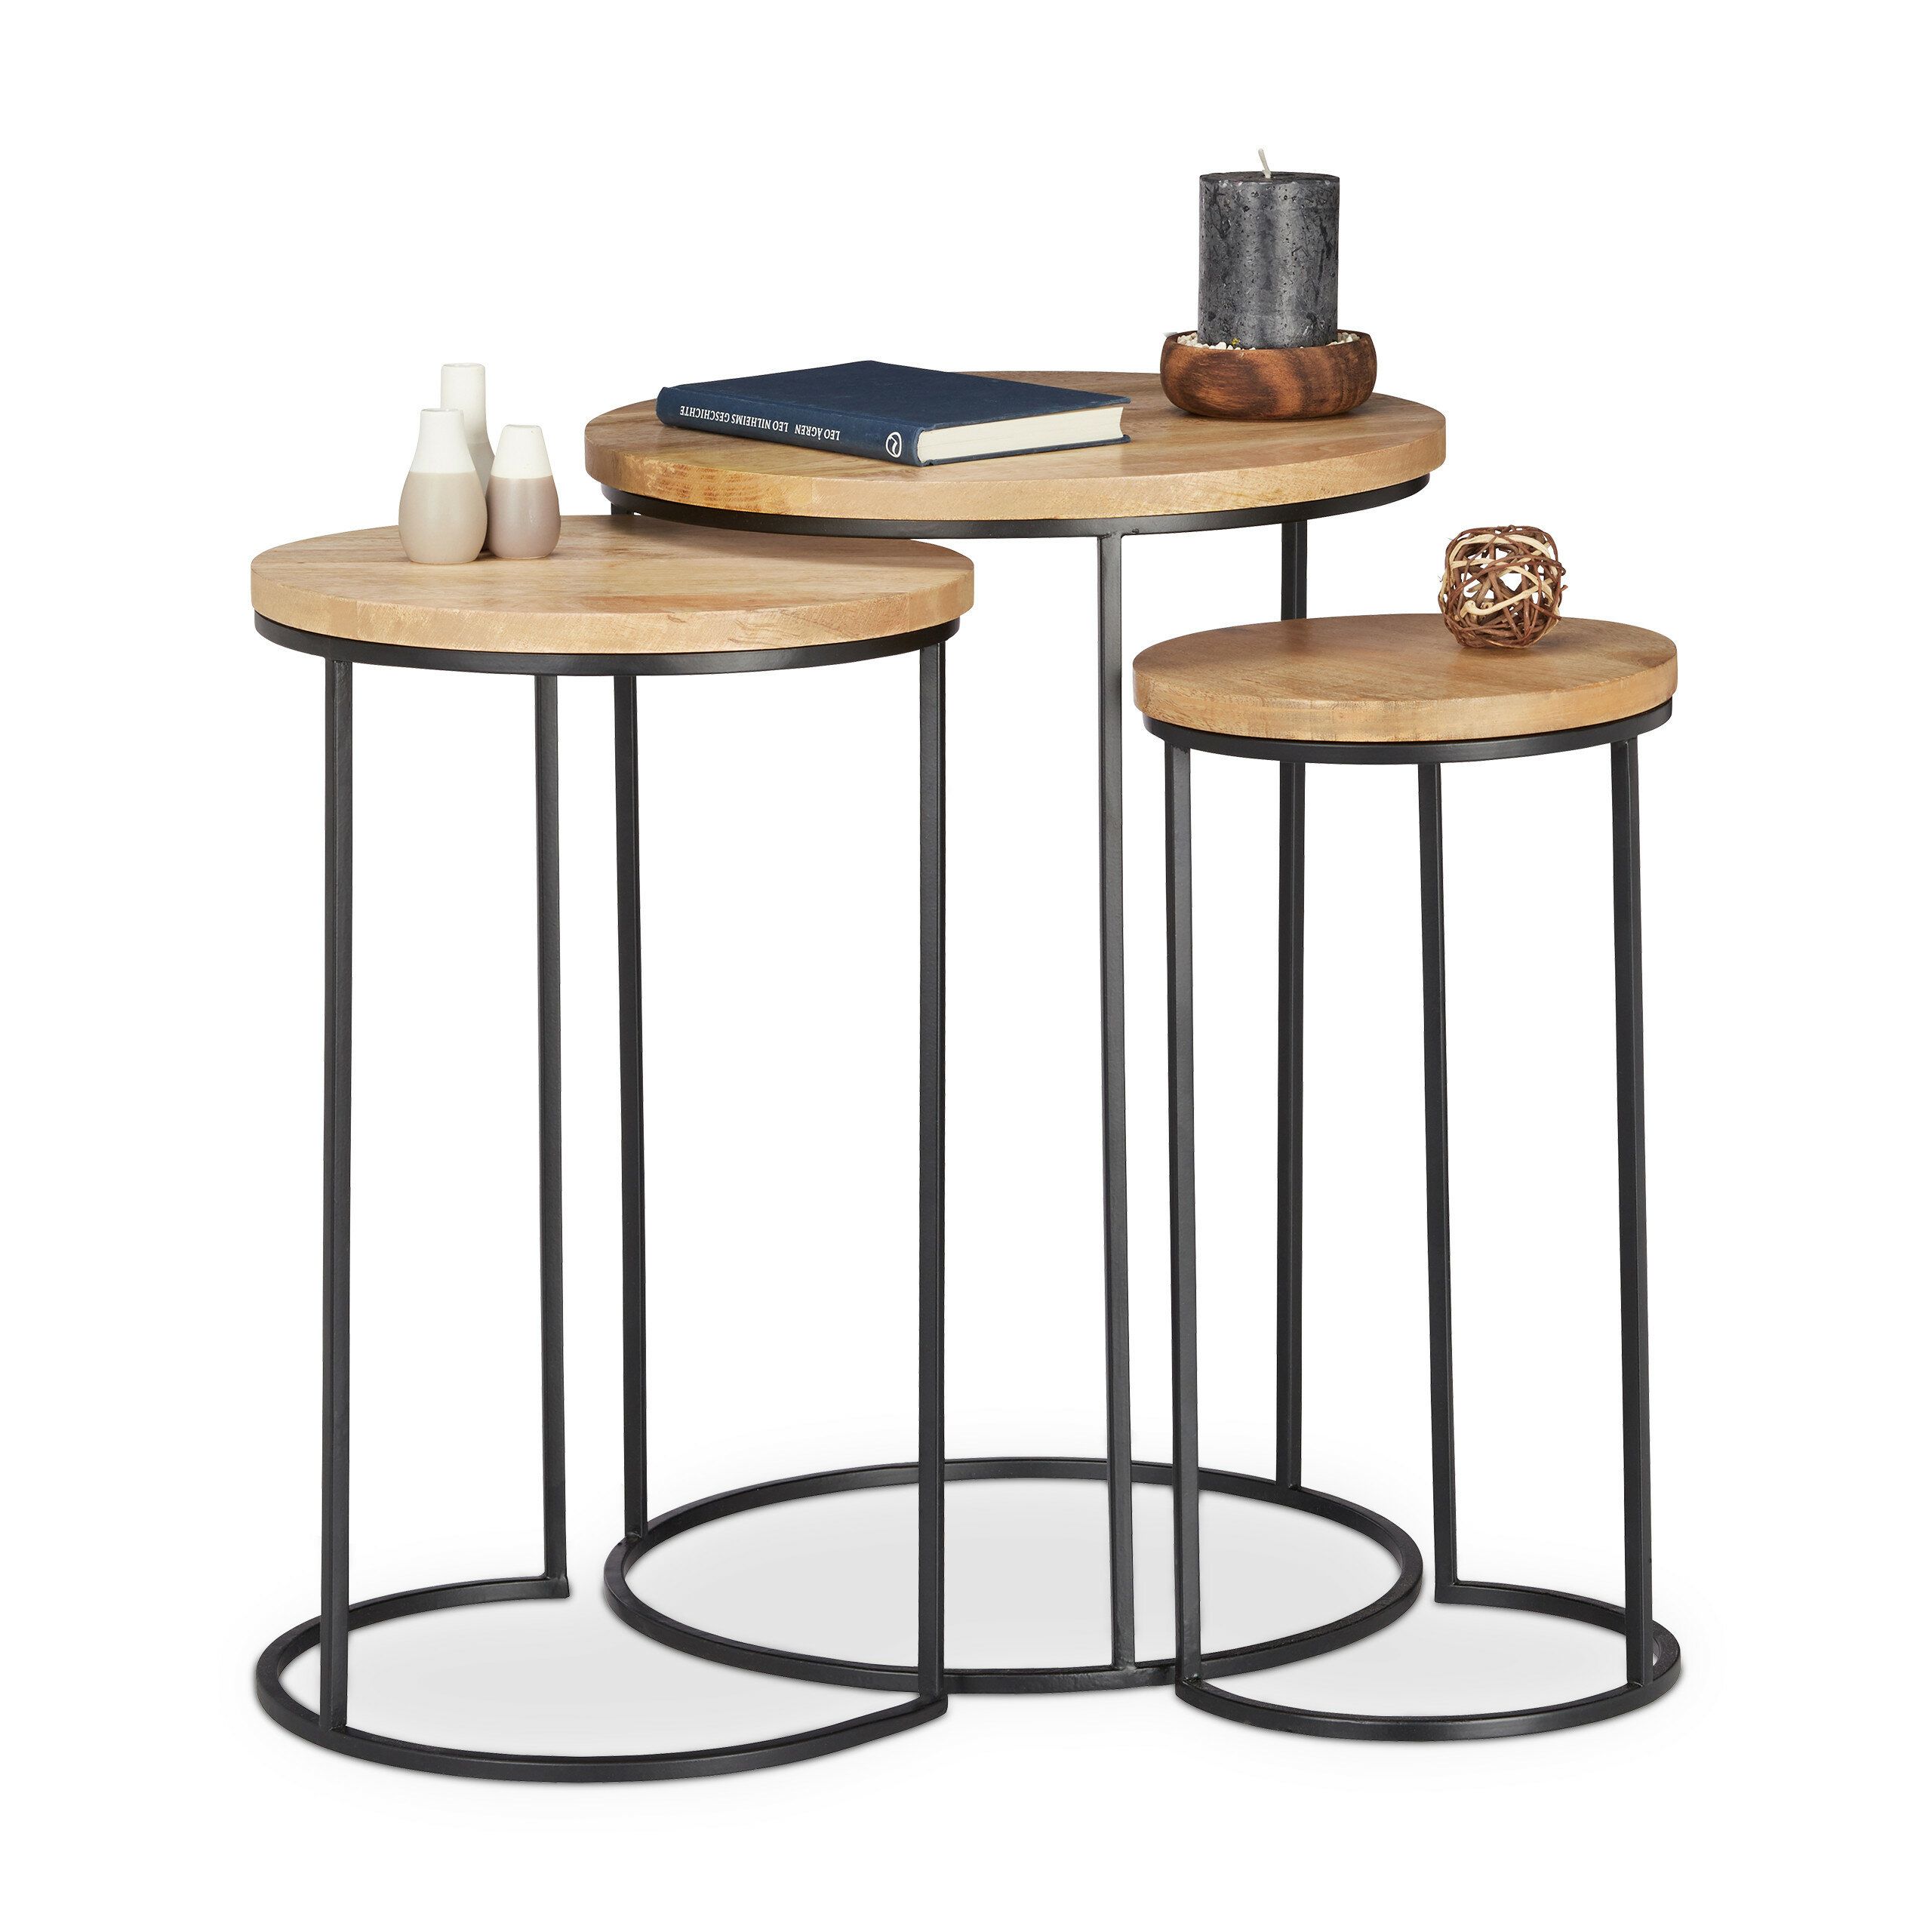 Stanwood 3 Piece Nesting Tables Pertaining To Standwood Metal Garden Stools (View 14 of 25)